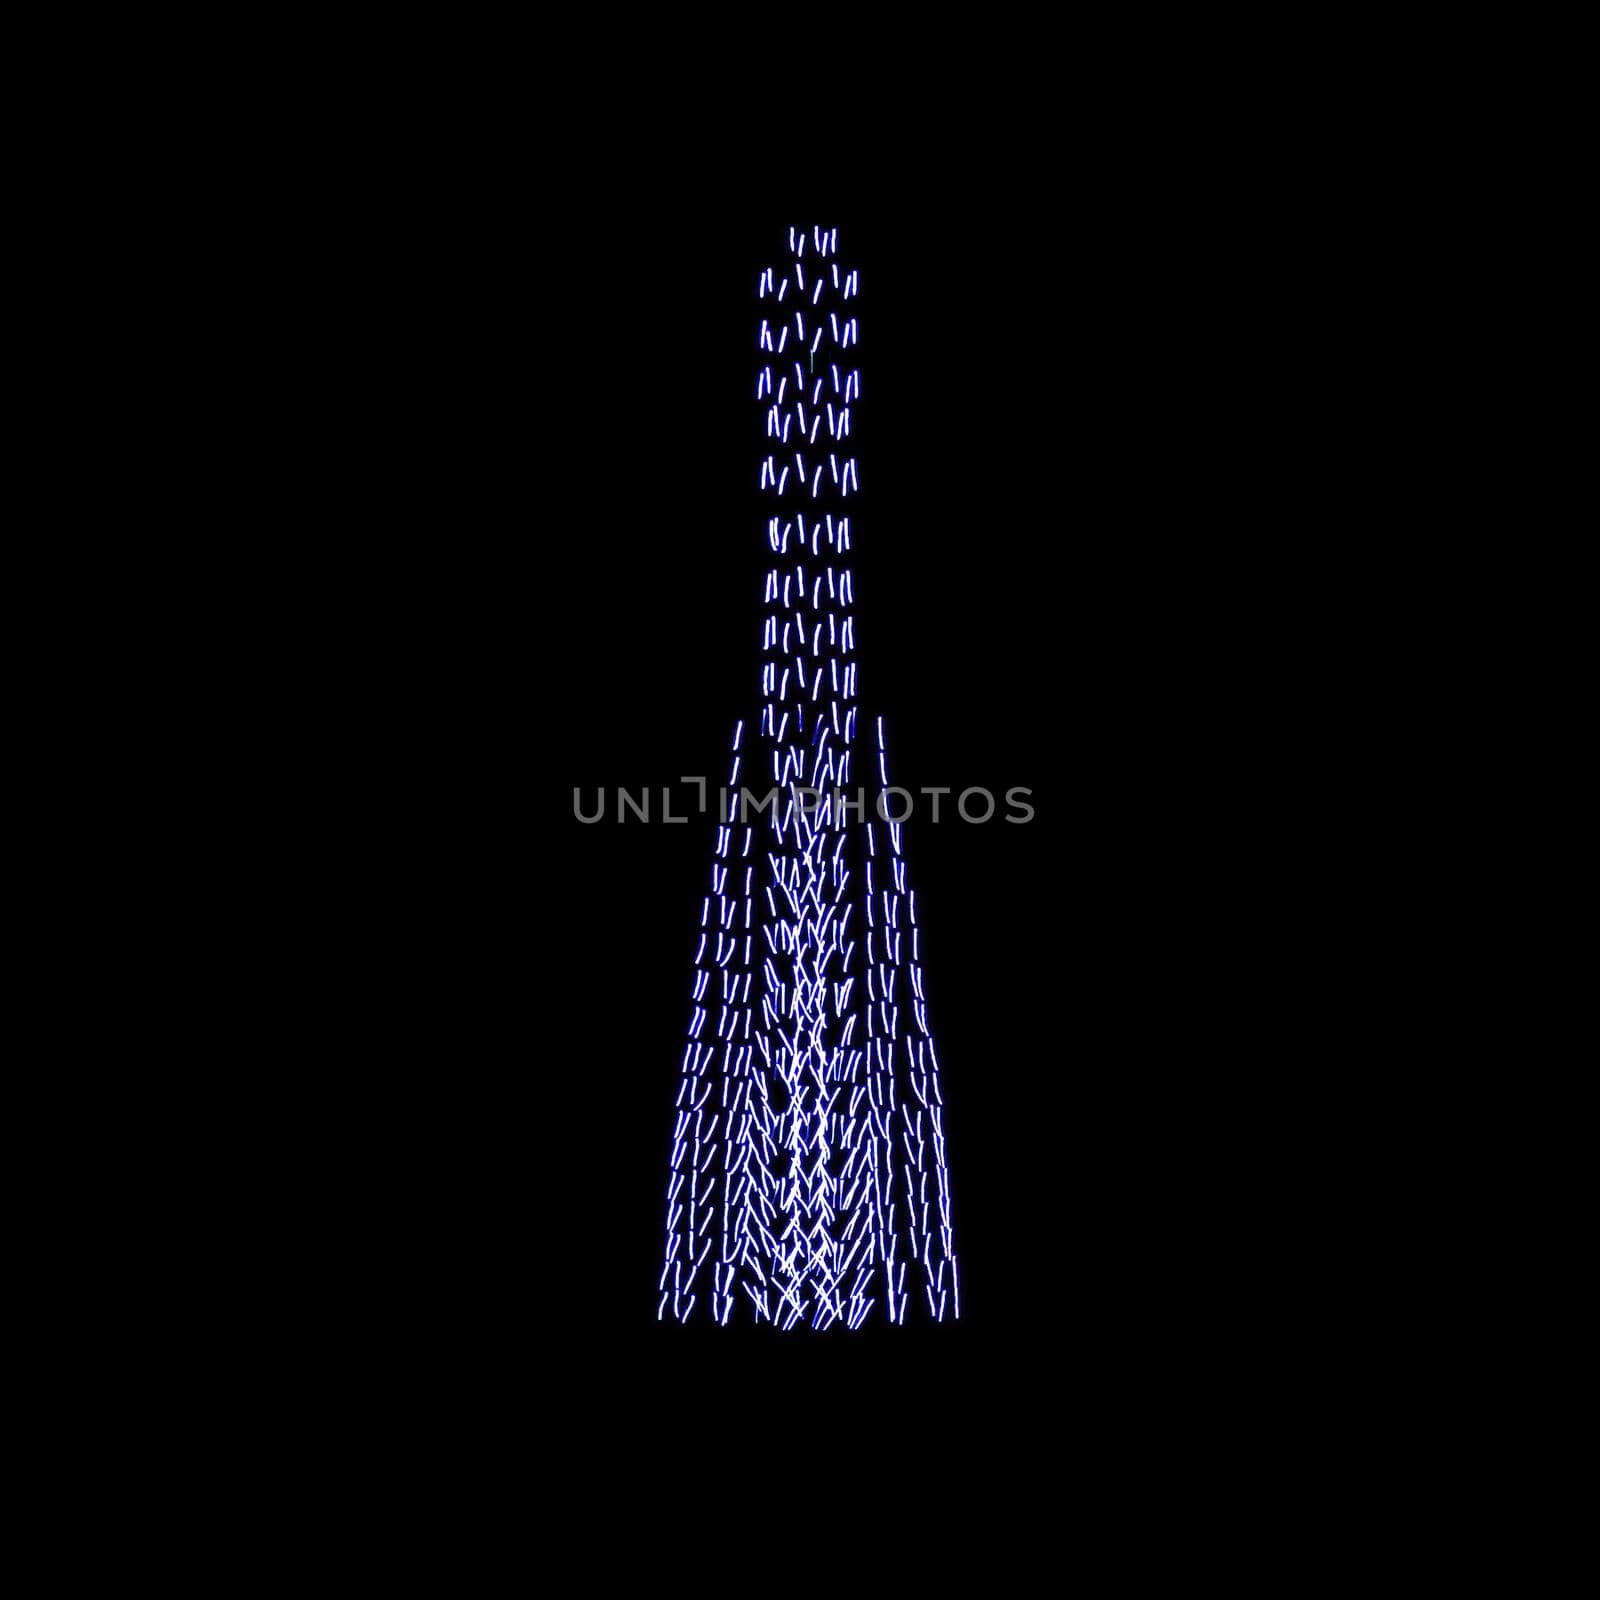 Colorful drone light shows on black night sky background. The figure of a rocket made of glowing drones.